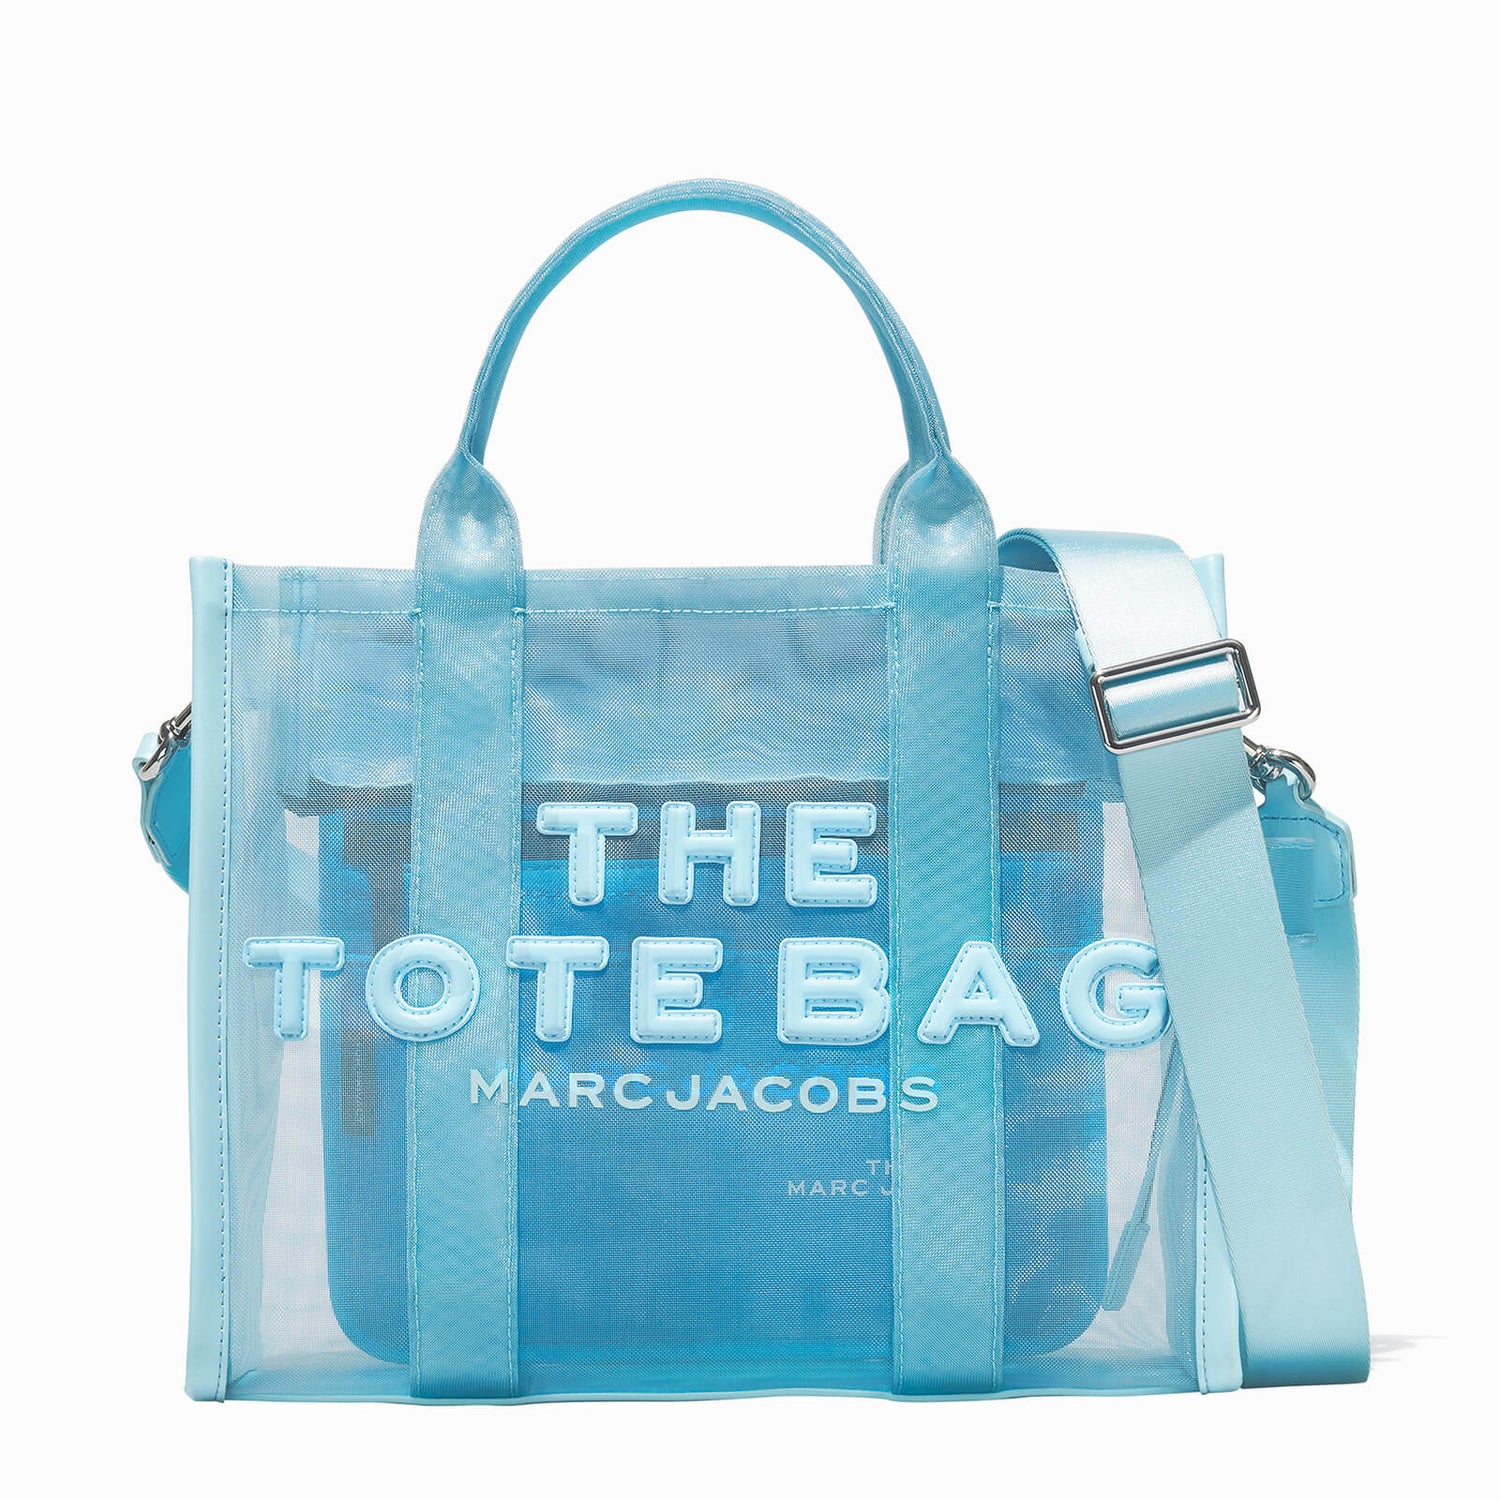 Marc Jacobs Women's The Small Mesh Tote Bag - Pale Blue